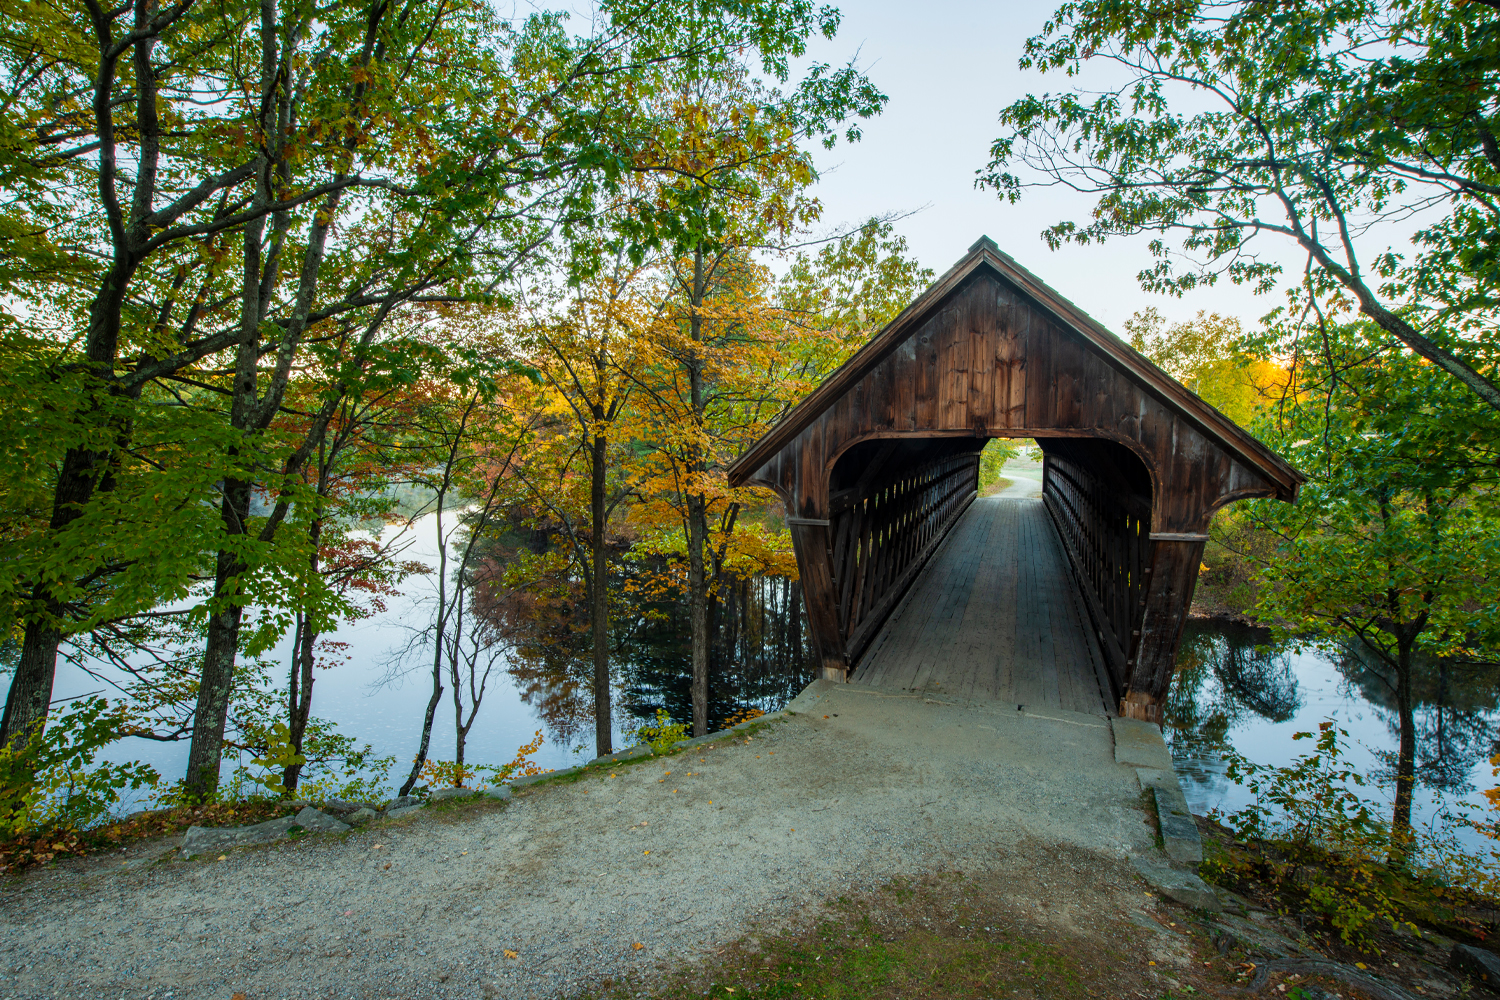 Check out One of Stowe's many covered bridges when you visit vermont in spring of 2022